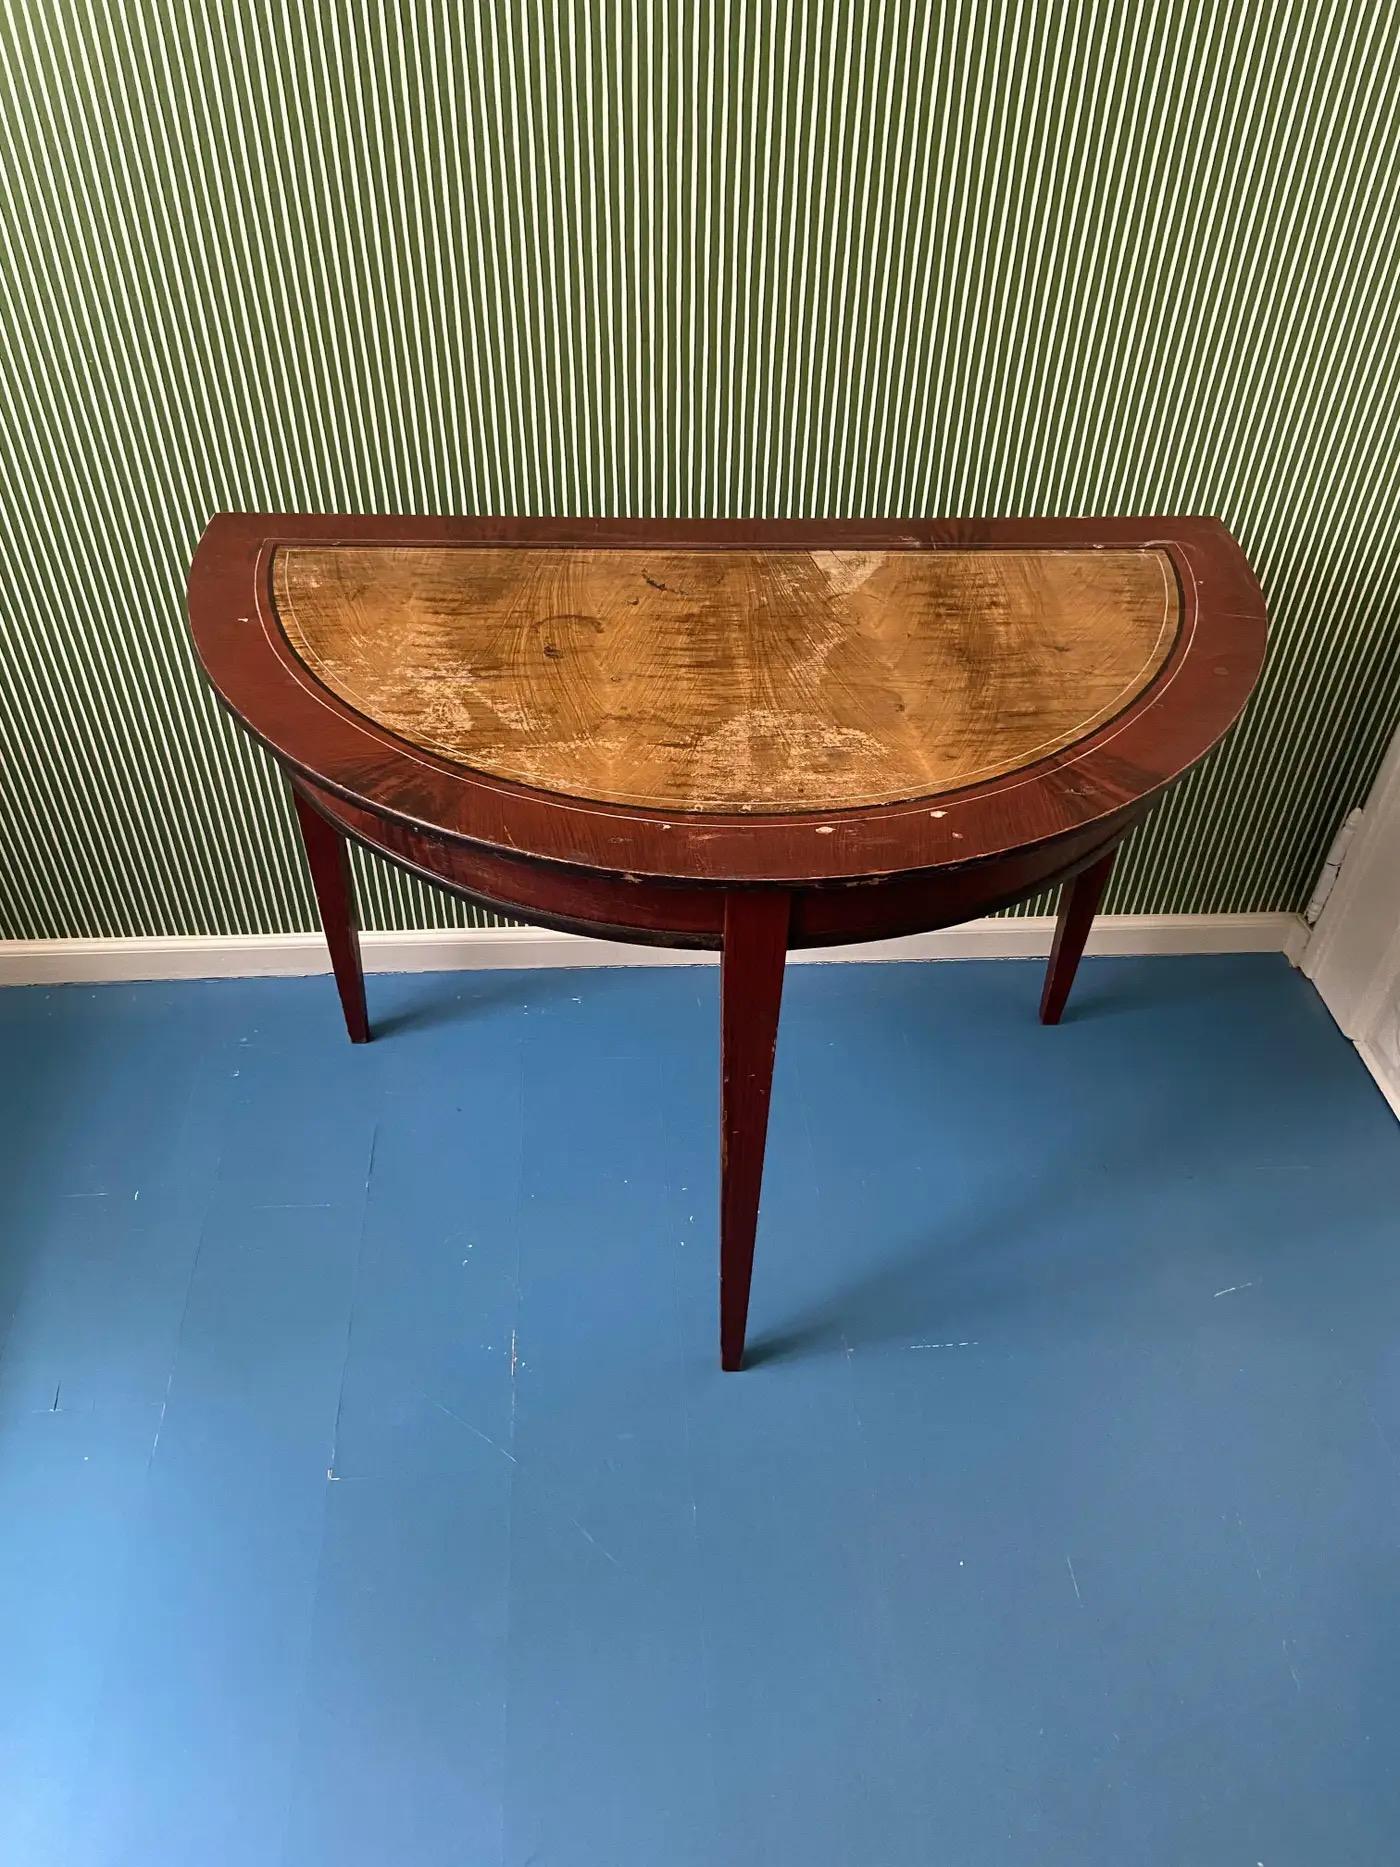 Hand-Painted Antique Folk Art Demi Lune Table in Painted Wood, Sweden, Mid-19th Century For Sale